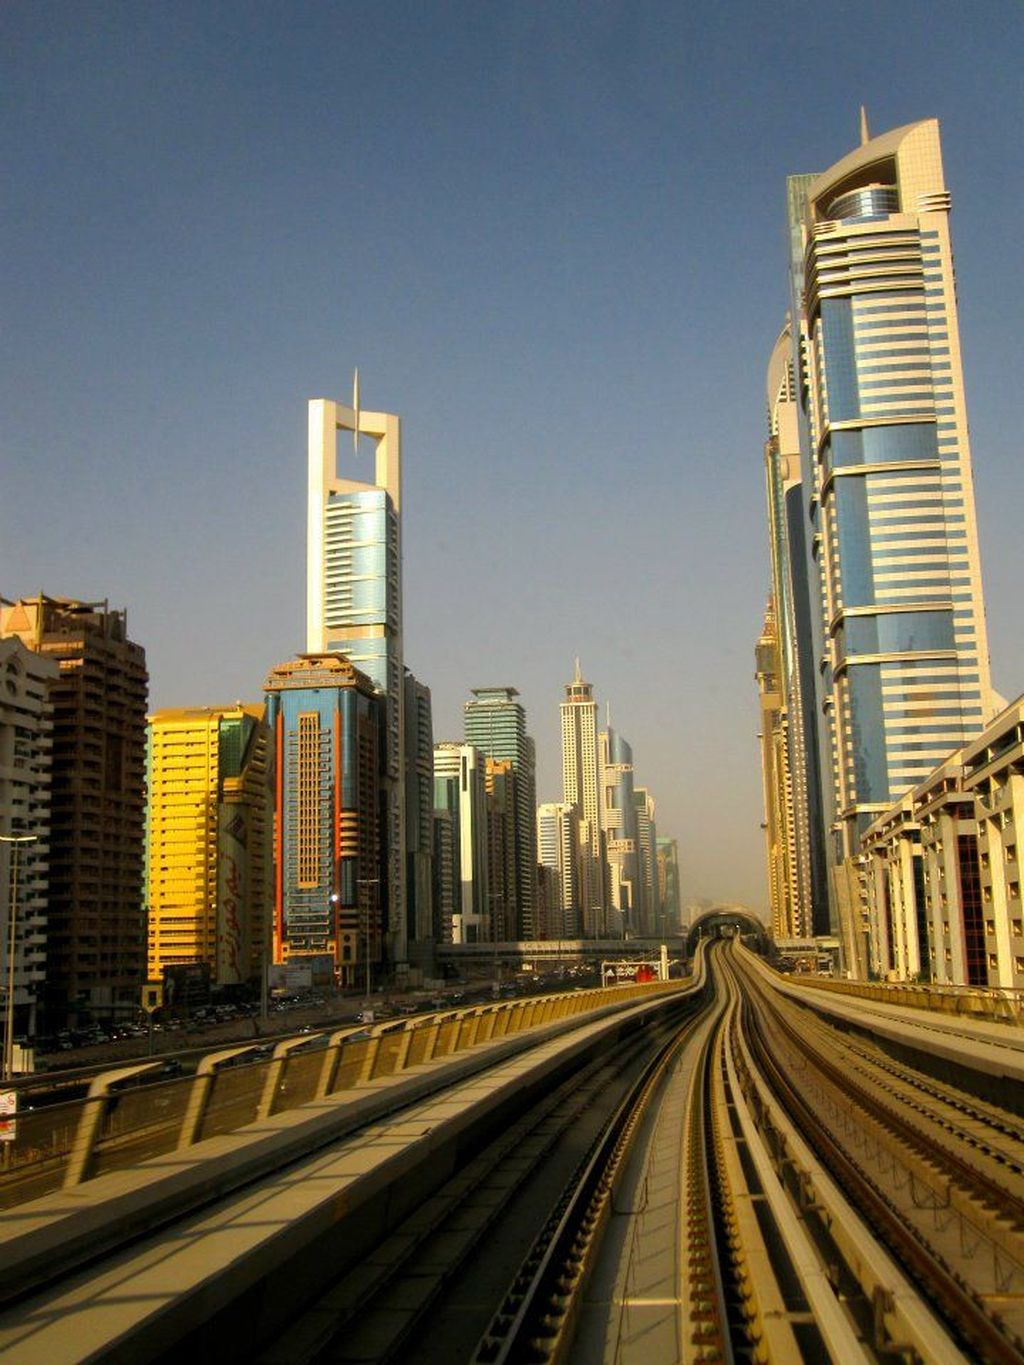 Awesome Photos Of Dubai To Make You Want To Visit It09